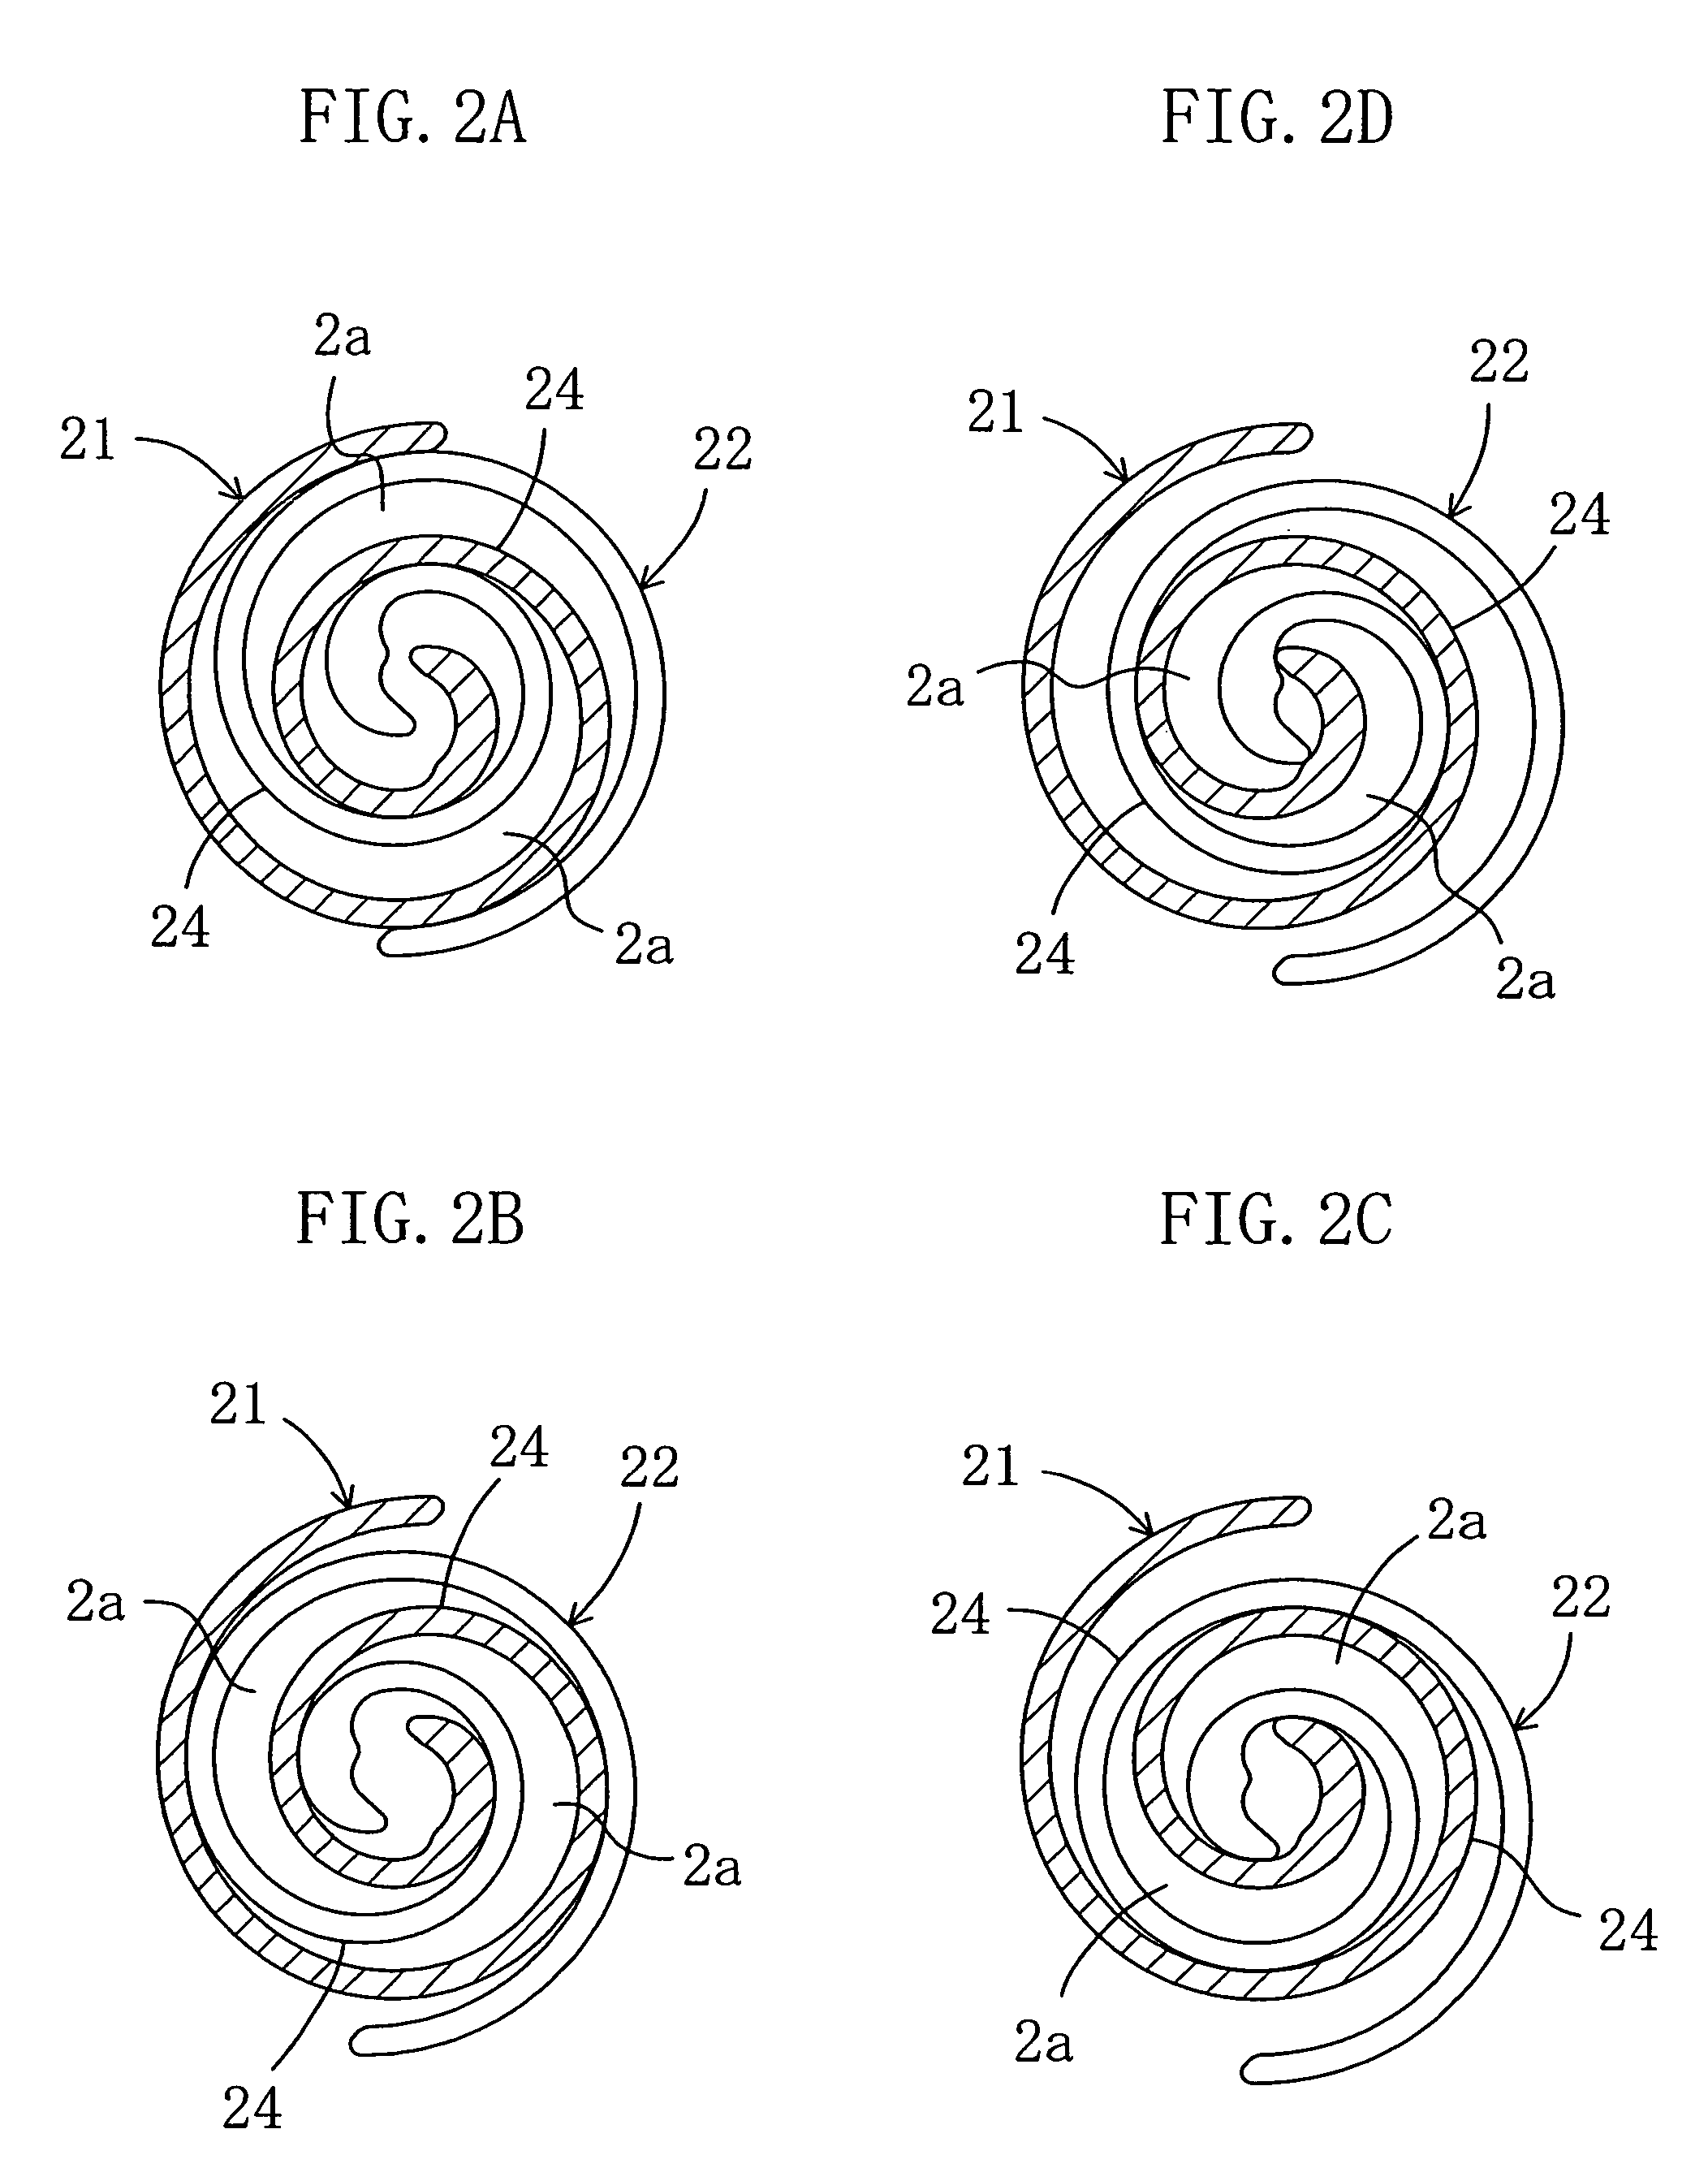 Scroll fluid machine having an adjustment member with a deformable element